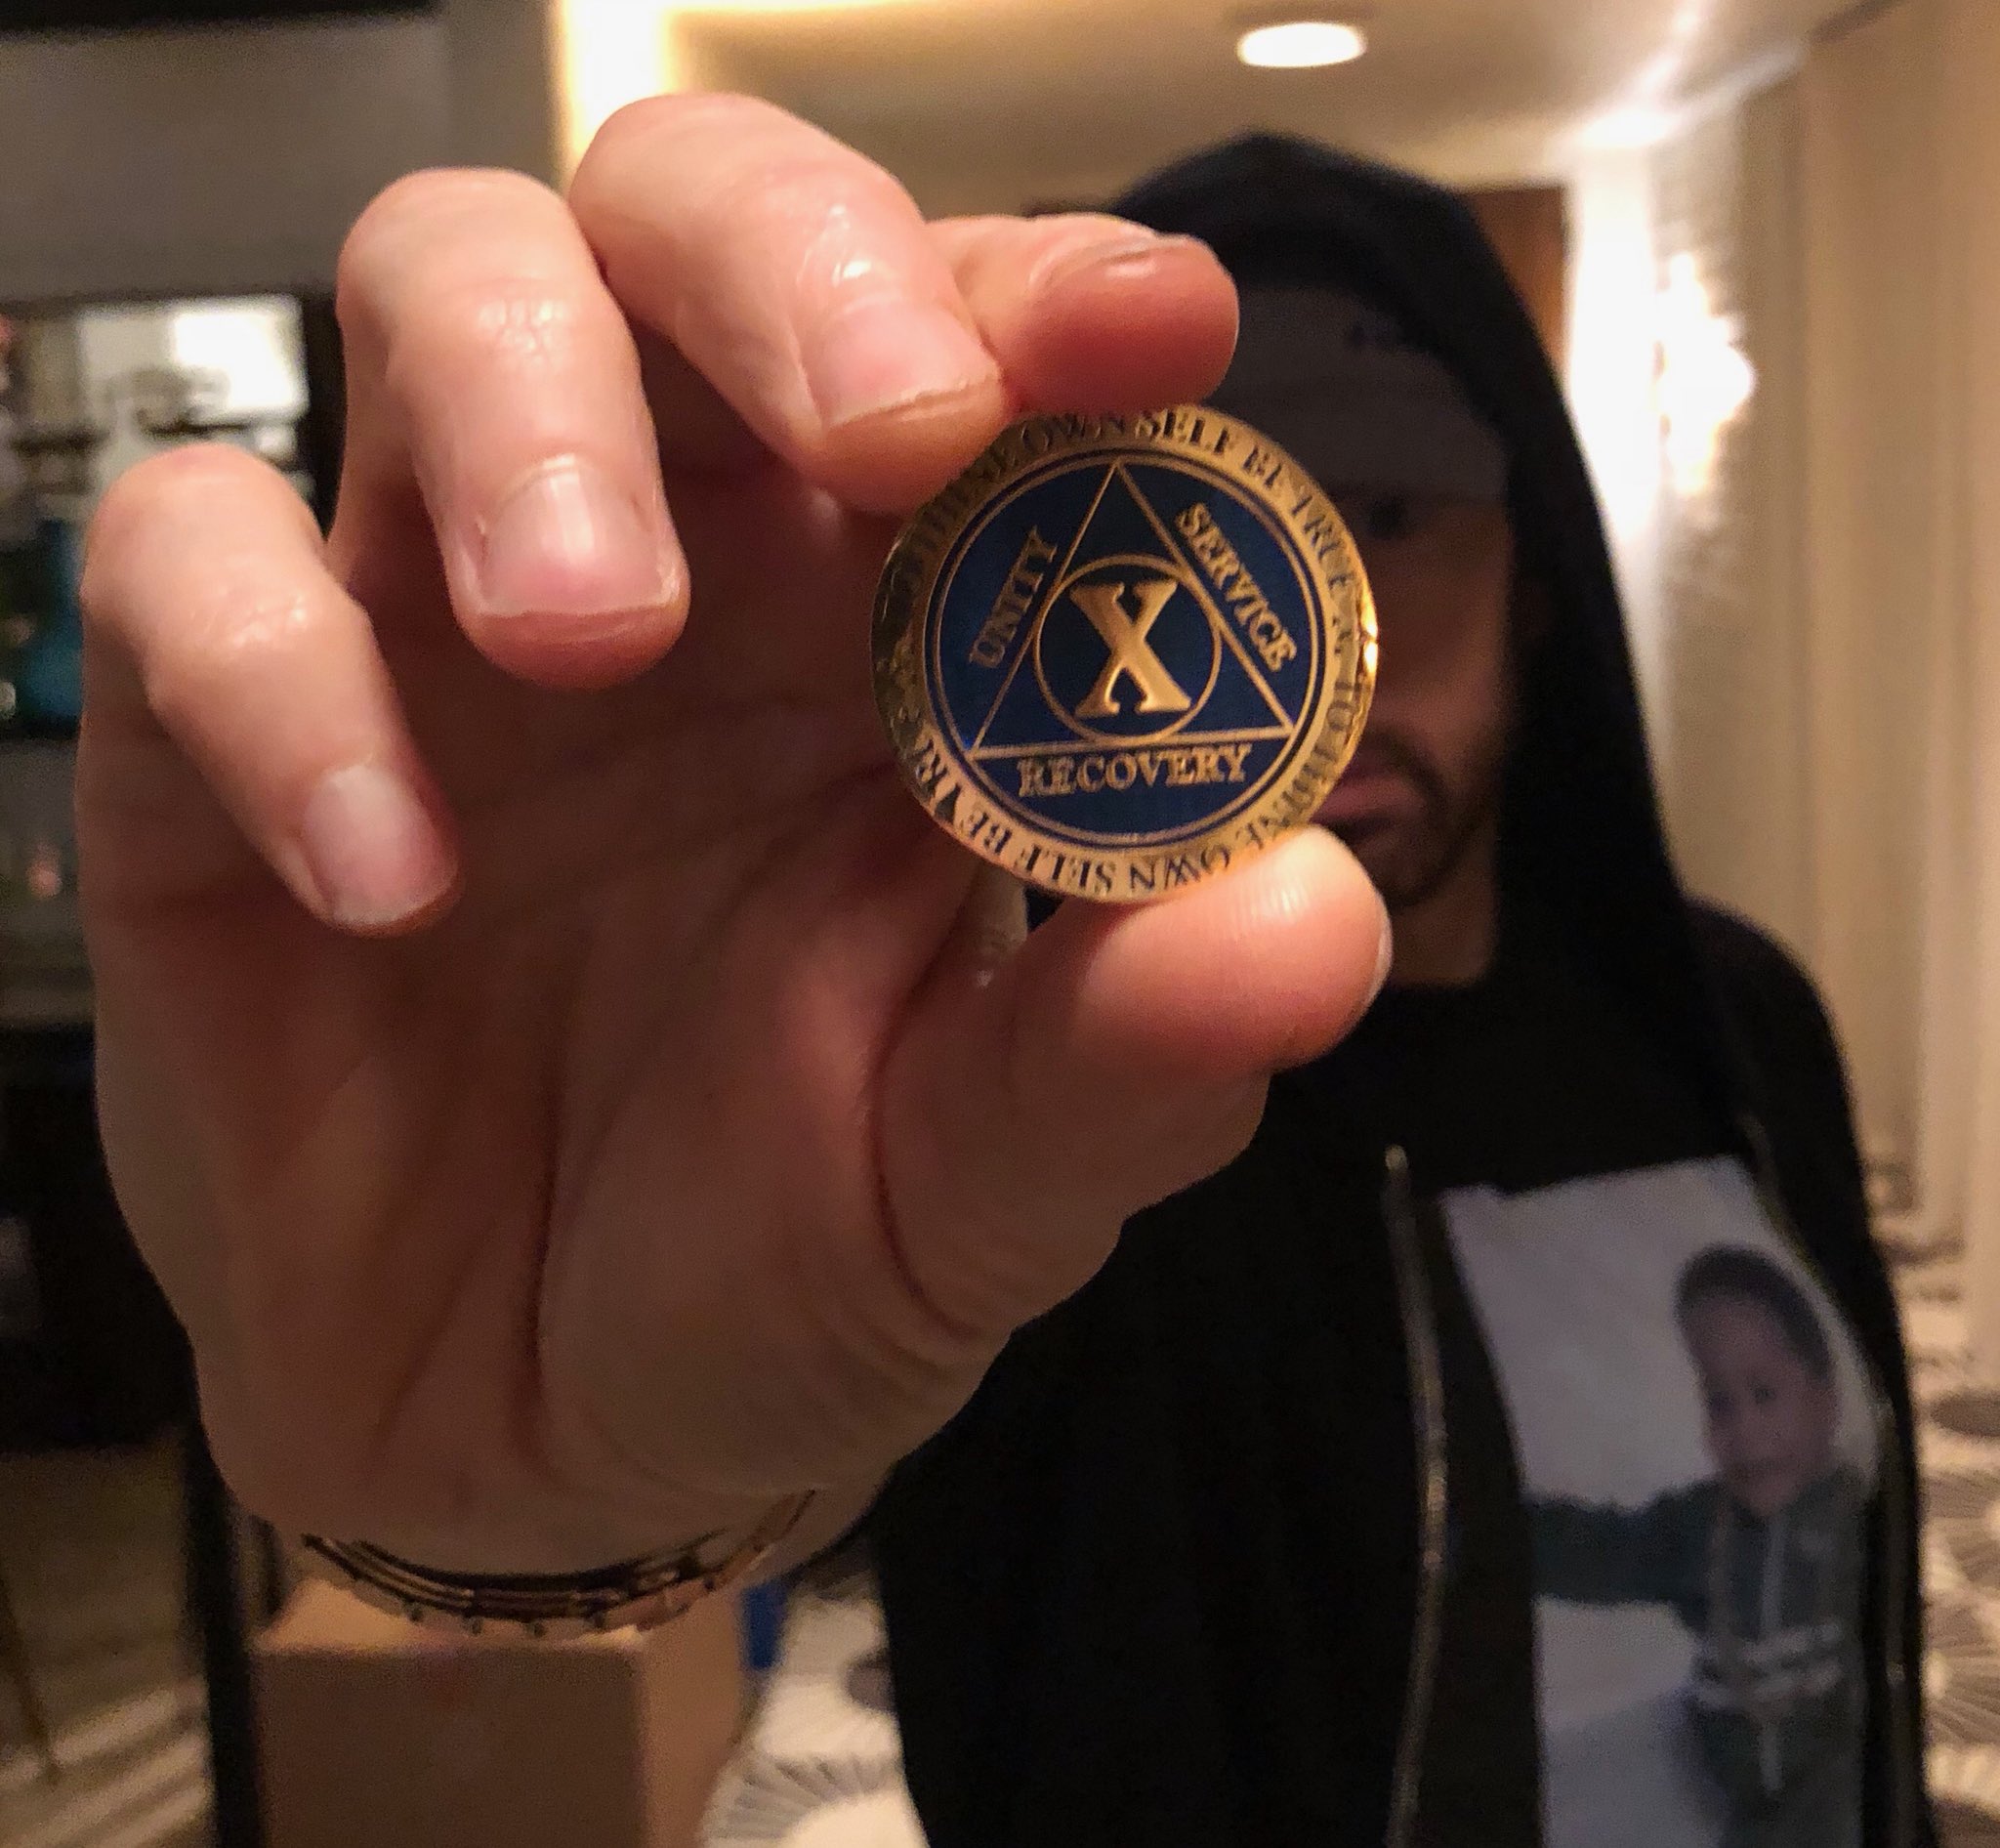 Eminem just celebrated 10 years of sobriety